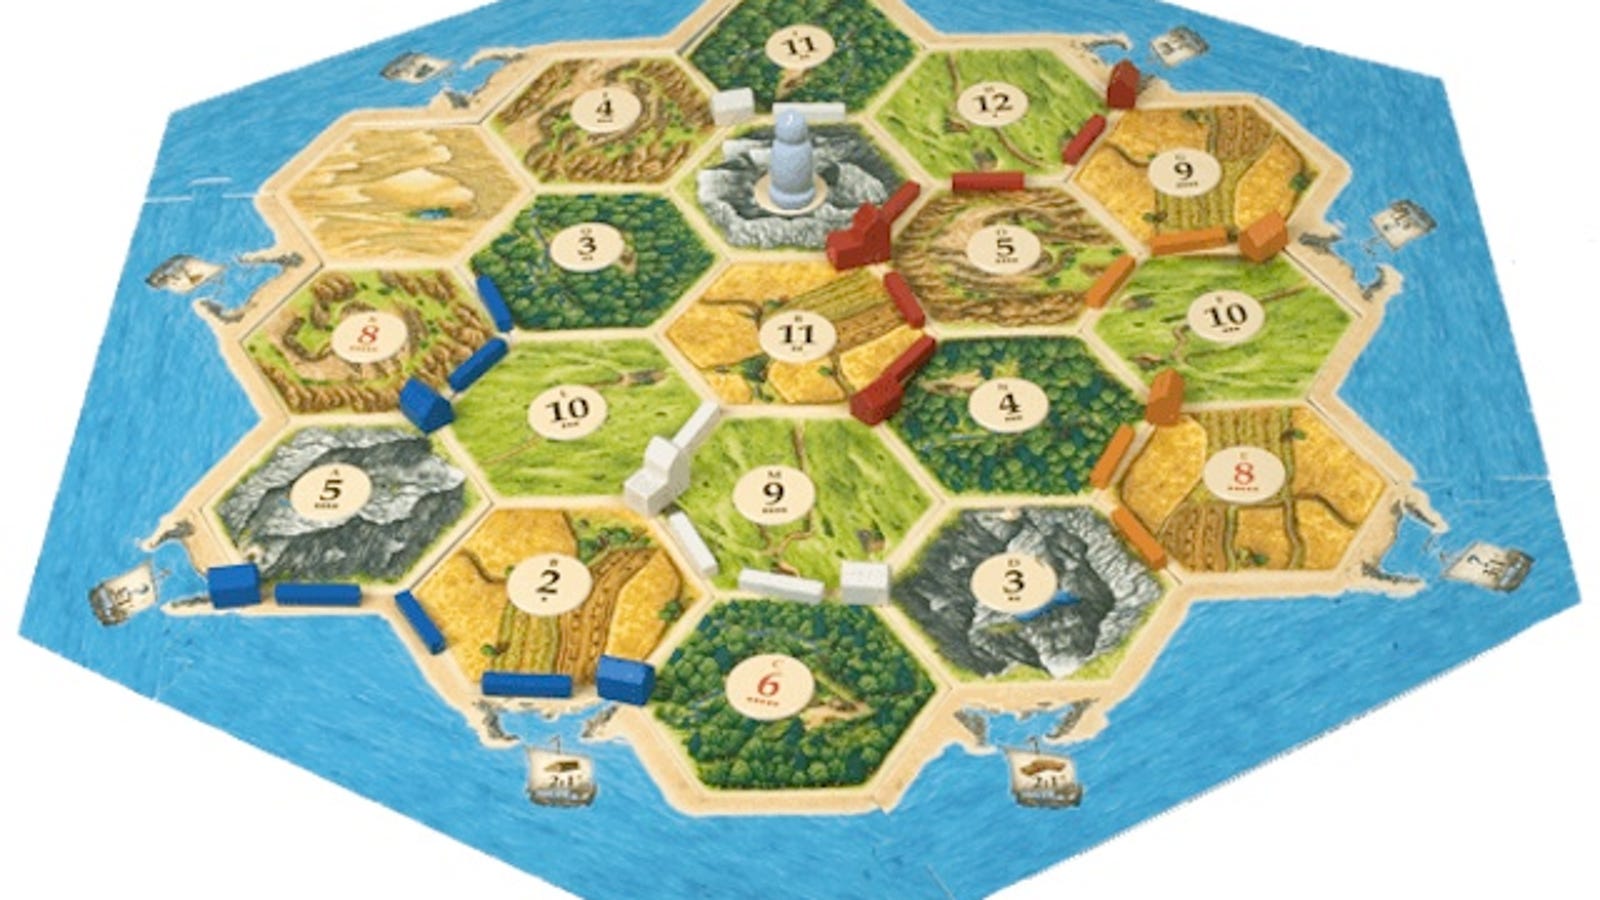 settlers of catan board game 4th edition